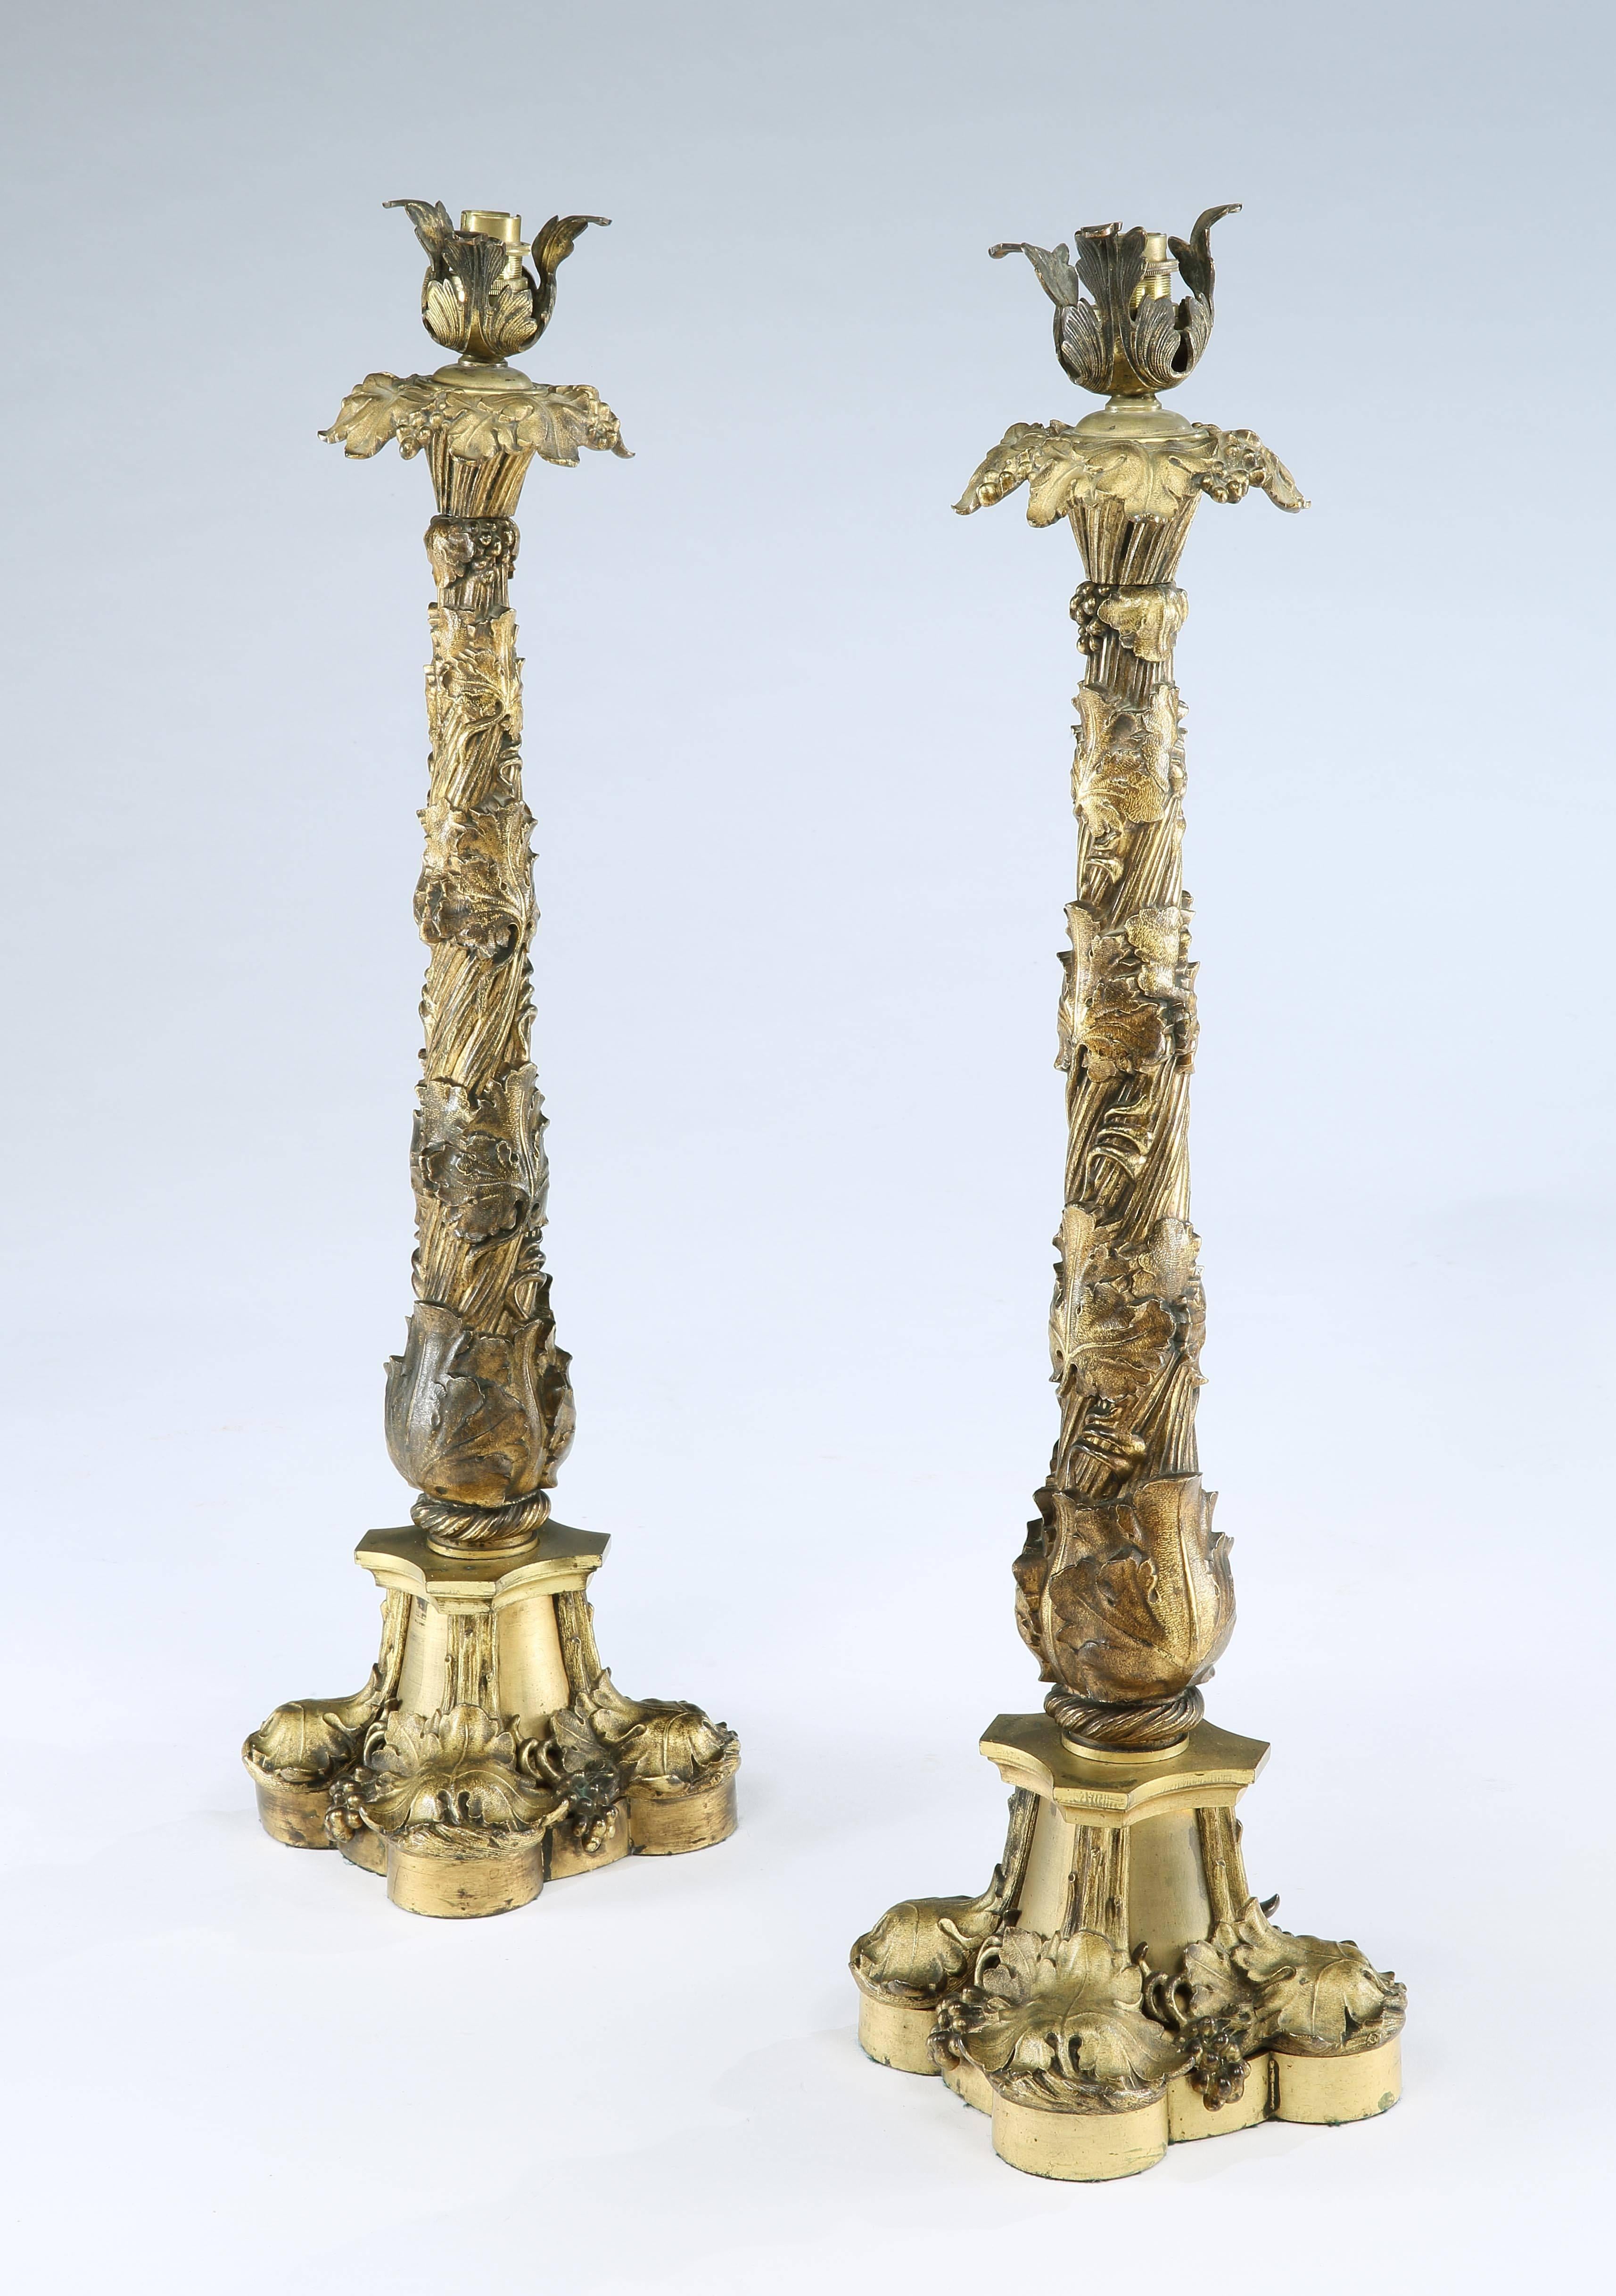 Attributed to Thomas Messenger & Sons

England, circa 1835

Both lamps with a quatrefoil base decorated in finely cast vine leaves and grapes leading to the column in the form of a twisted vine branch intertwined with leaves surmounted by a